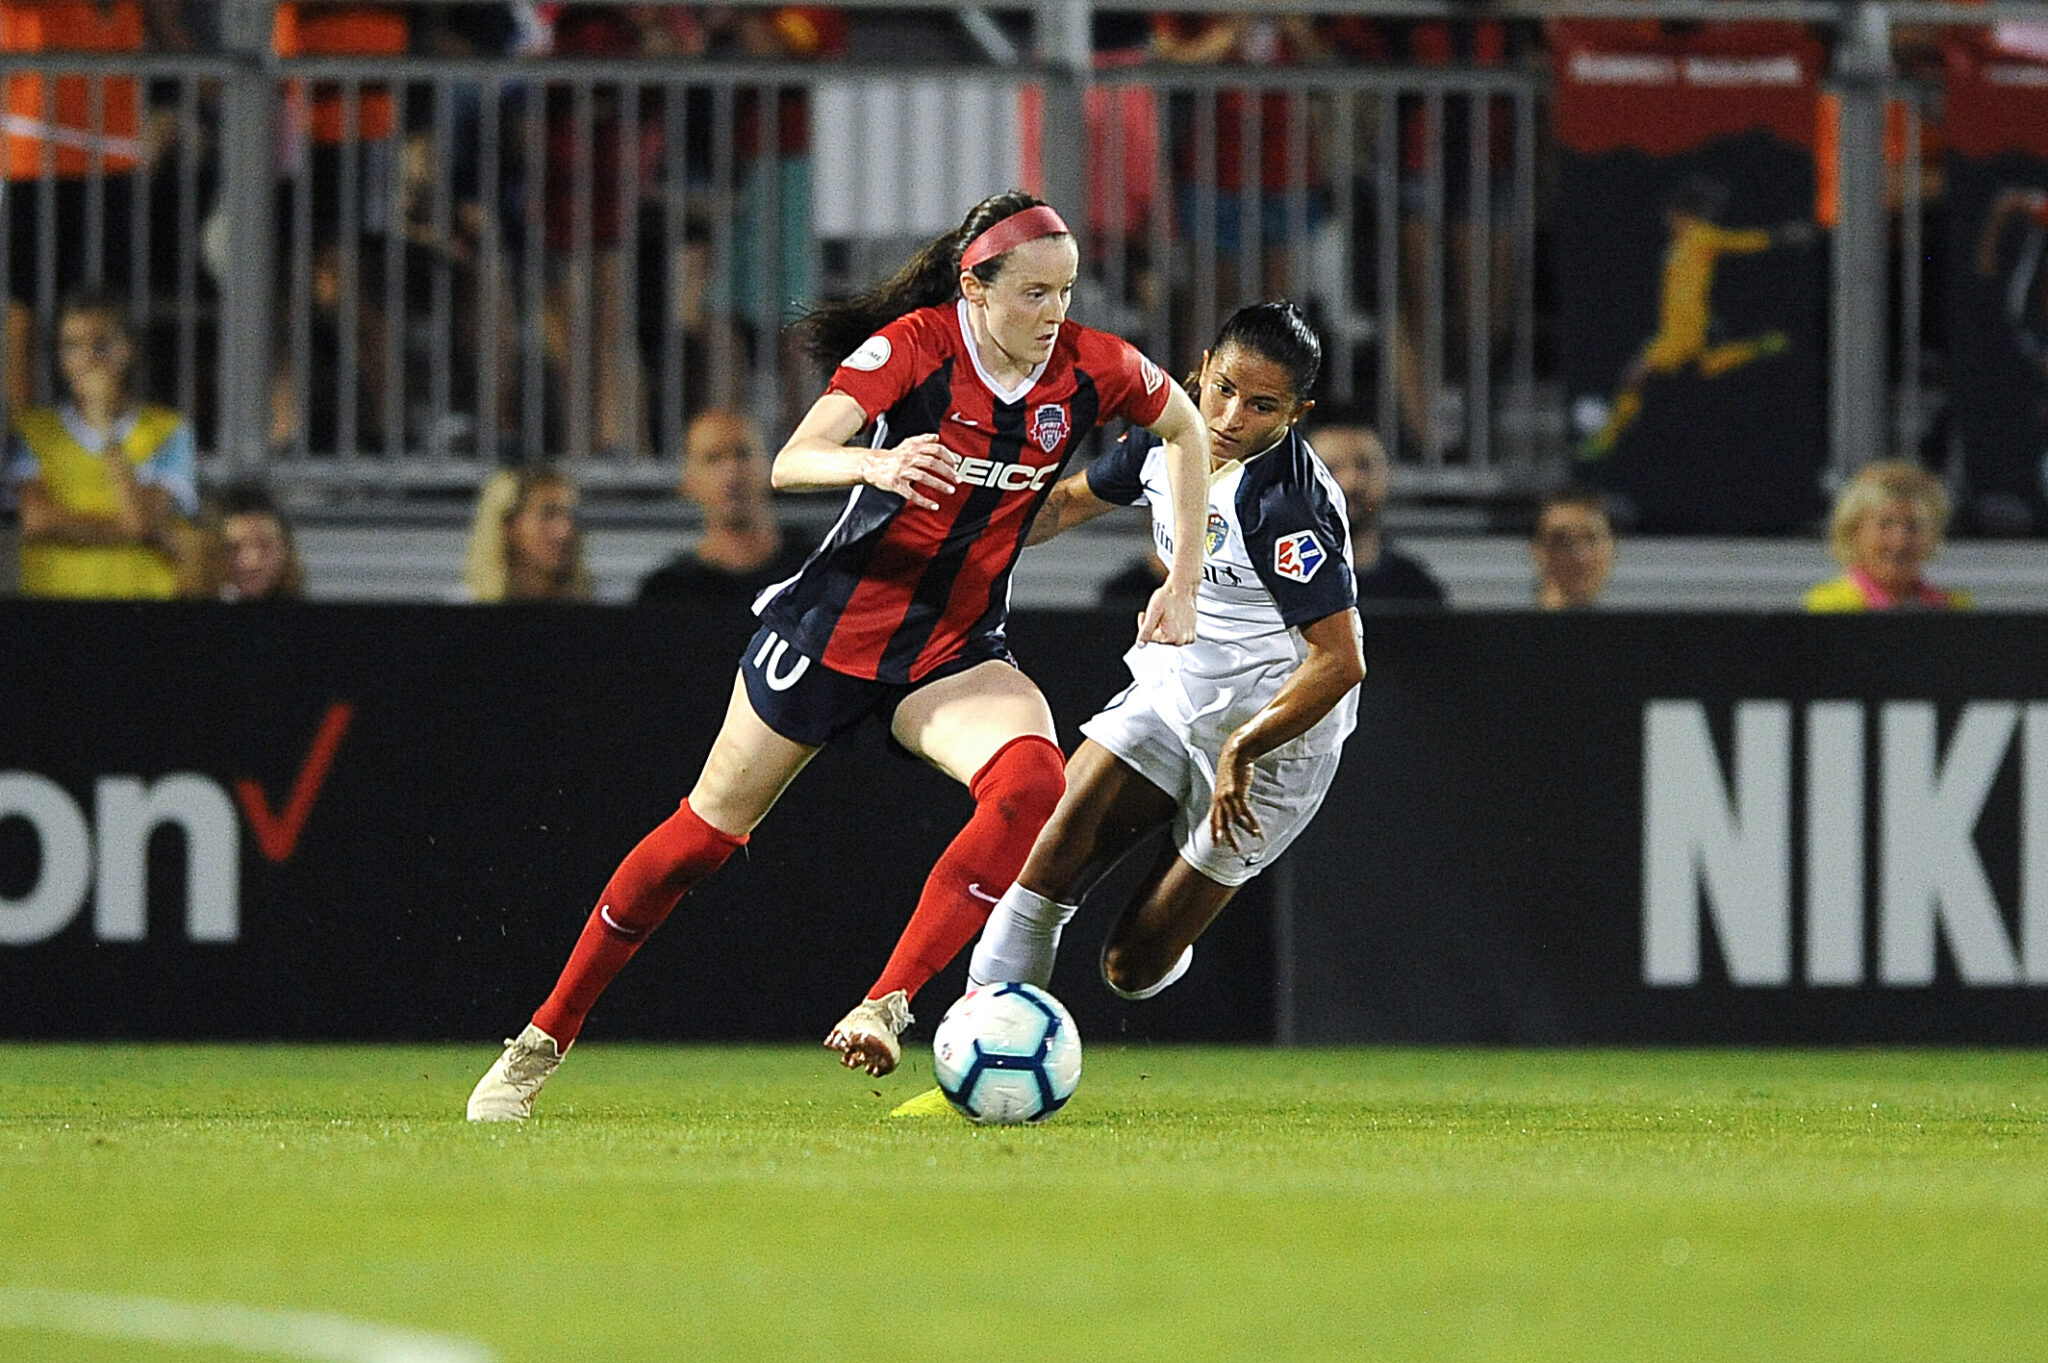 Spirit players, coaches, reflect on club’s first victory over Courage Featured Image